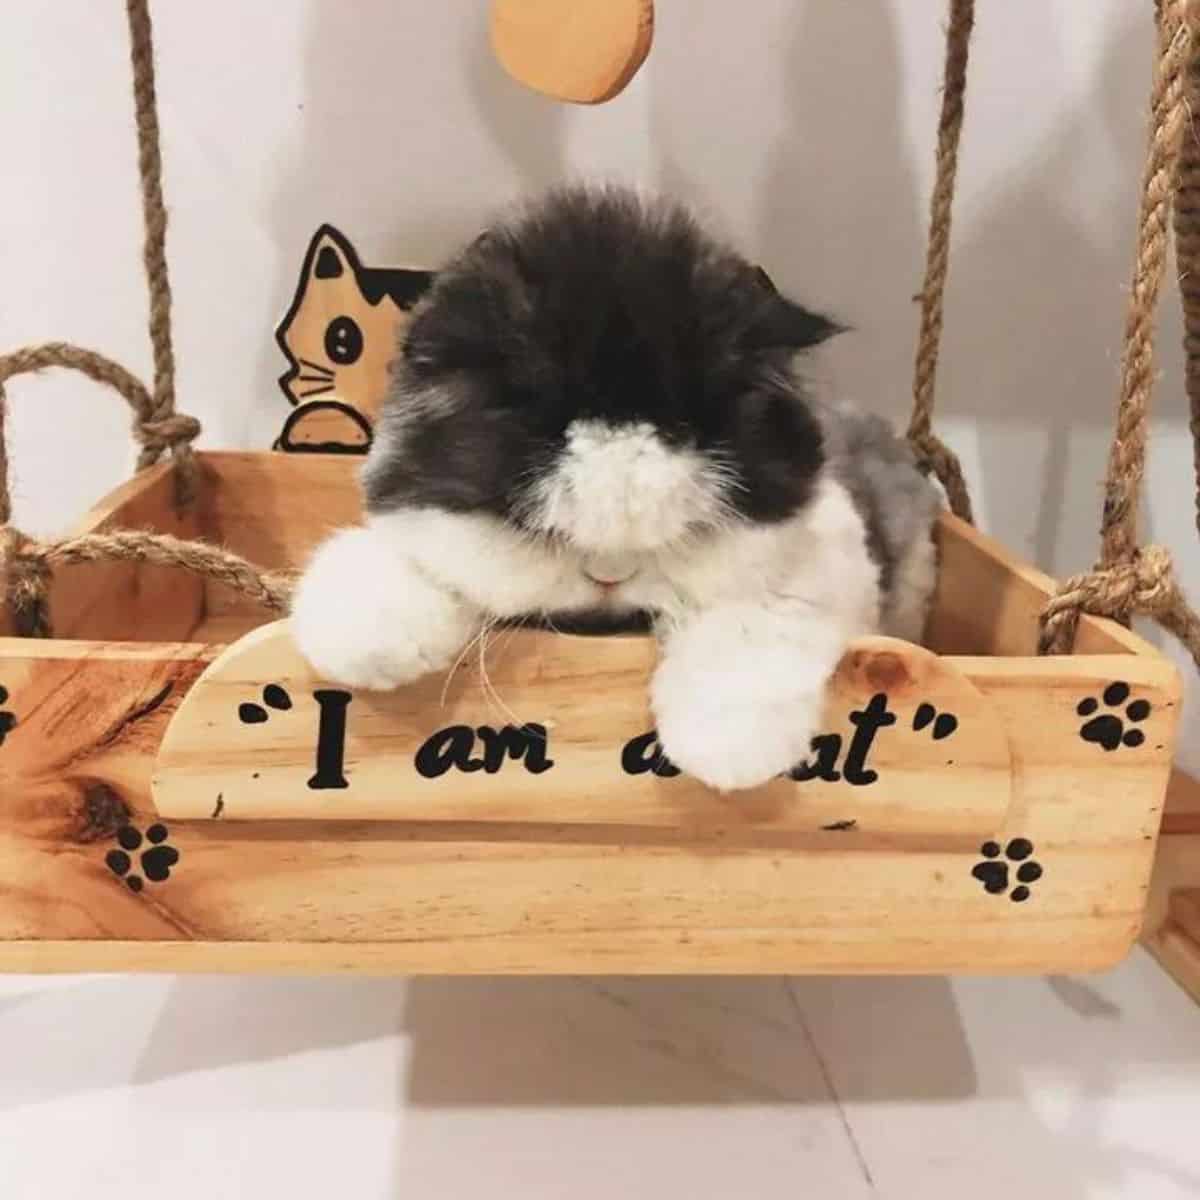 the cat enjoys your swing